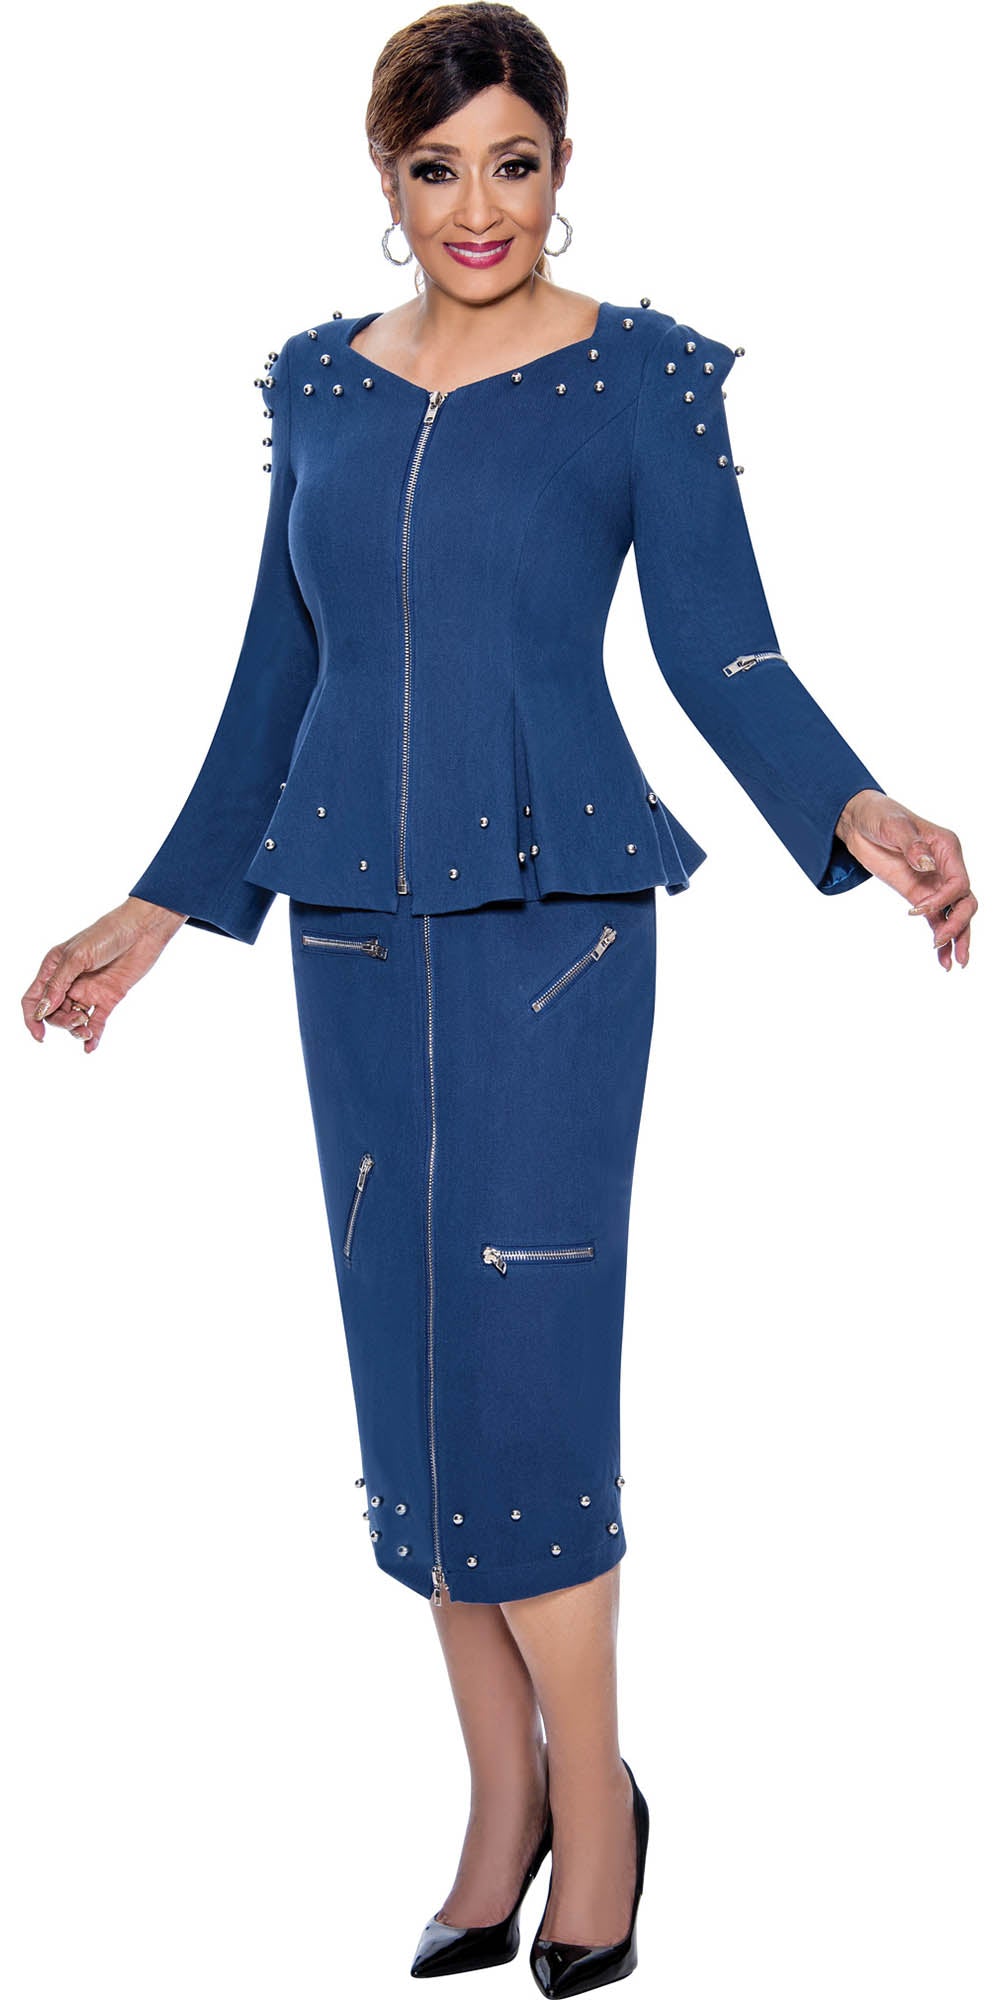 DCC - DCC4542 - Blue Embellished Twill Skirt Suit with Zipper Details